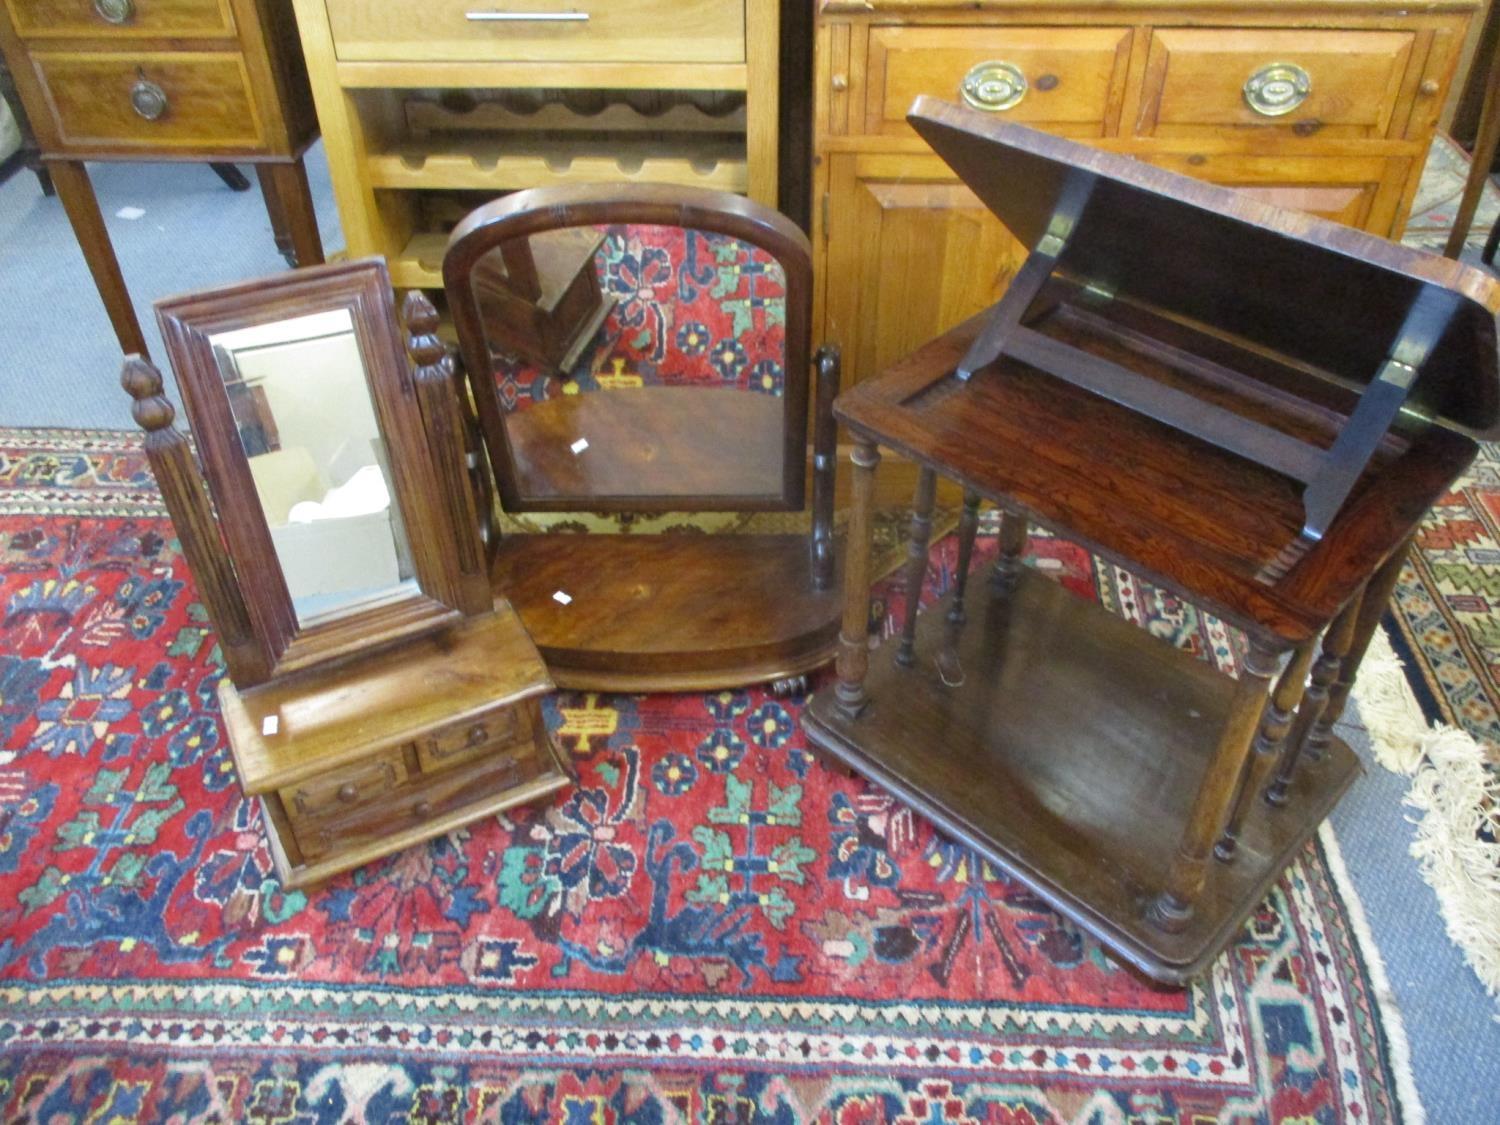 A 19th century and later rosewood and mahogany reading table, a Victorian mahogany swing mirror